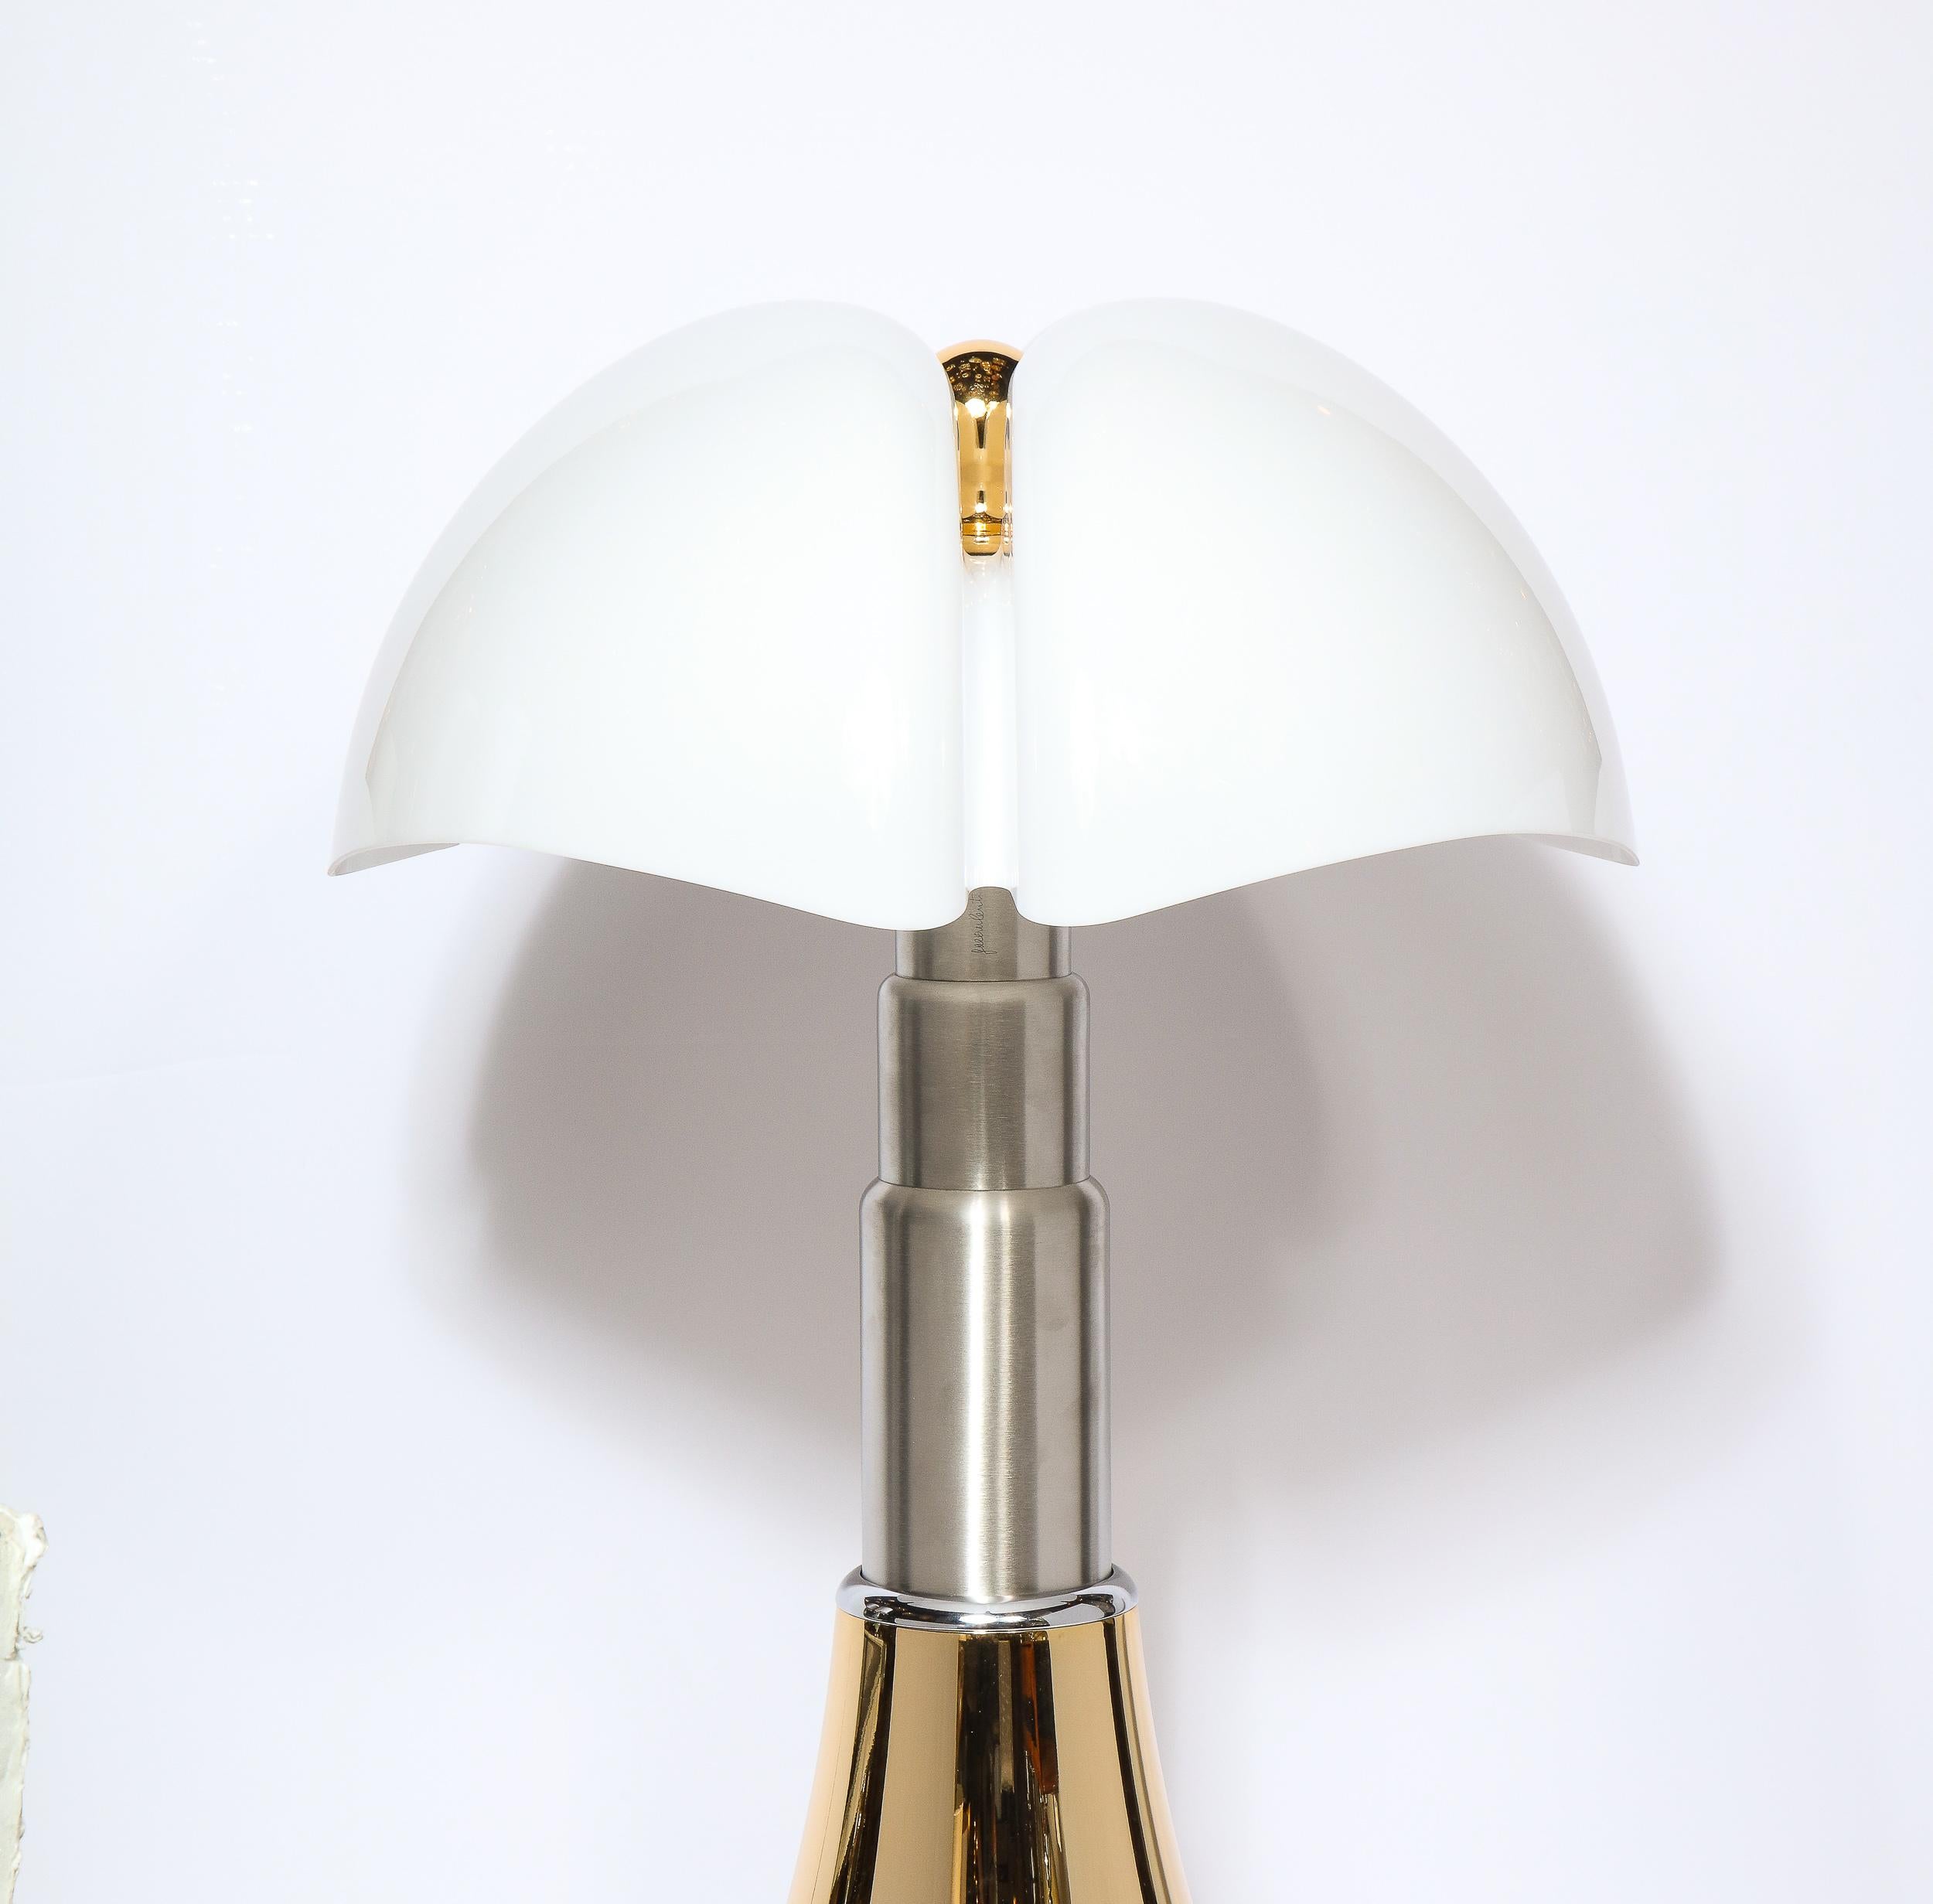 This sophisticated modernist telescoping Pipistrello table lamp was designed by Gae Aulenti for Martinelli Luce. It features a polished brass base that tapers to a tiered skyscraper style brushed aluminum neck on which a sculptural billowing frosted